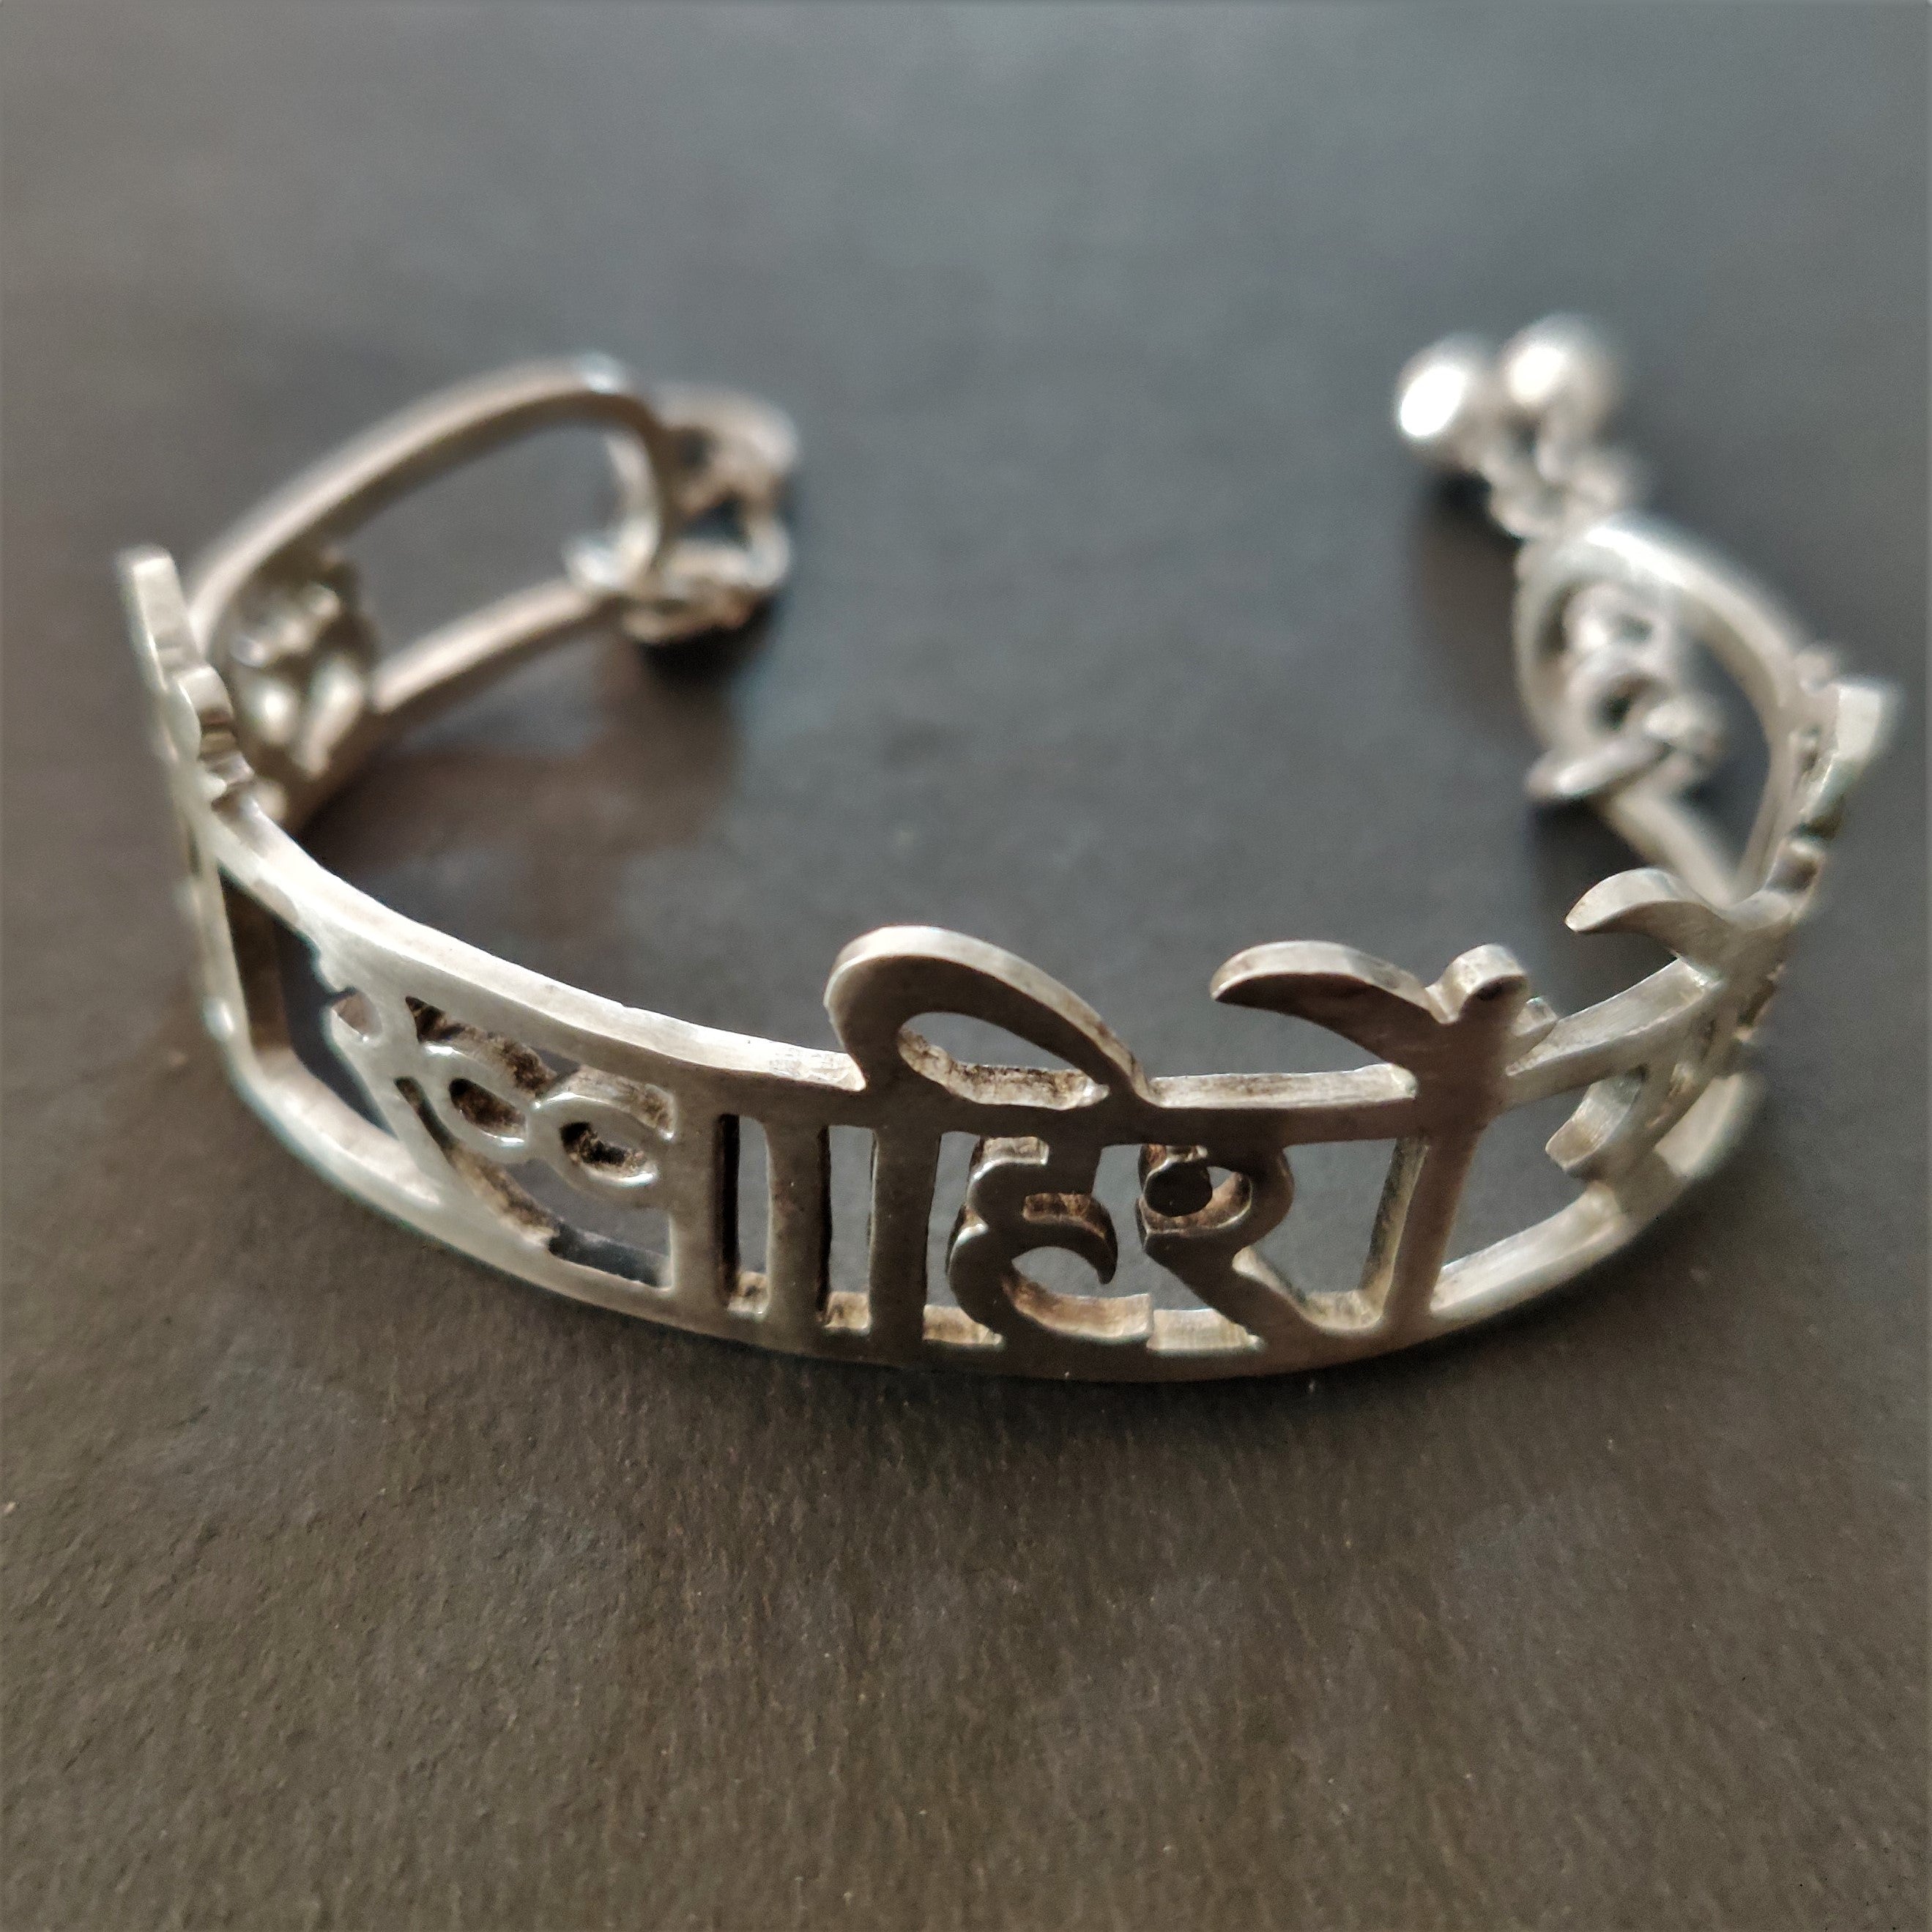 Shop Silver bangles and bracelets online - Hazaron Khwahishein Aisi by Quirksmith